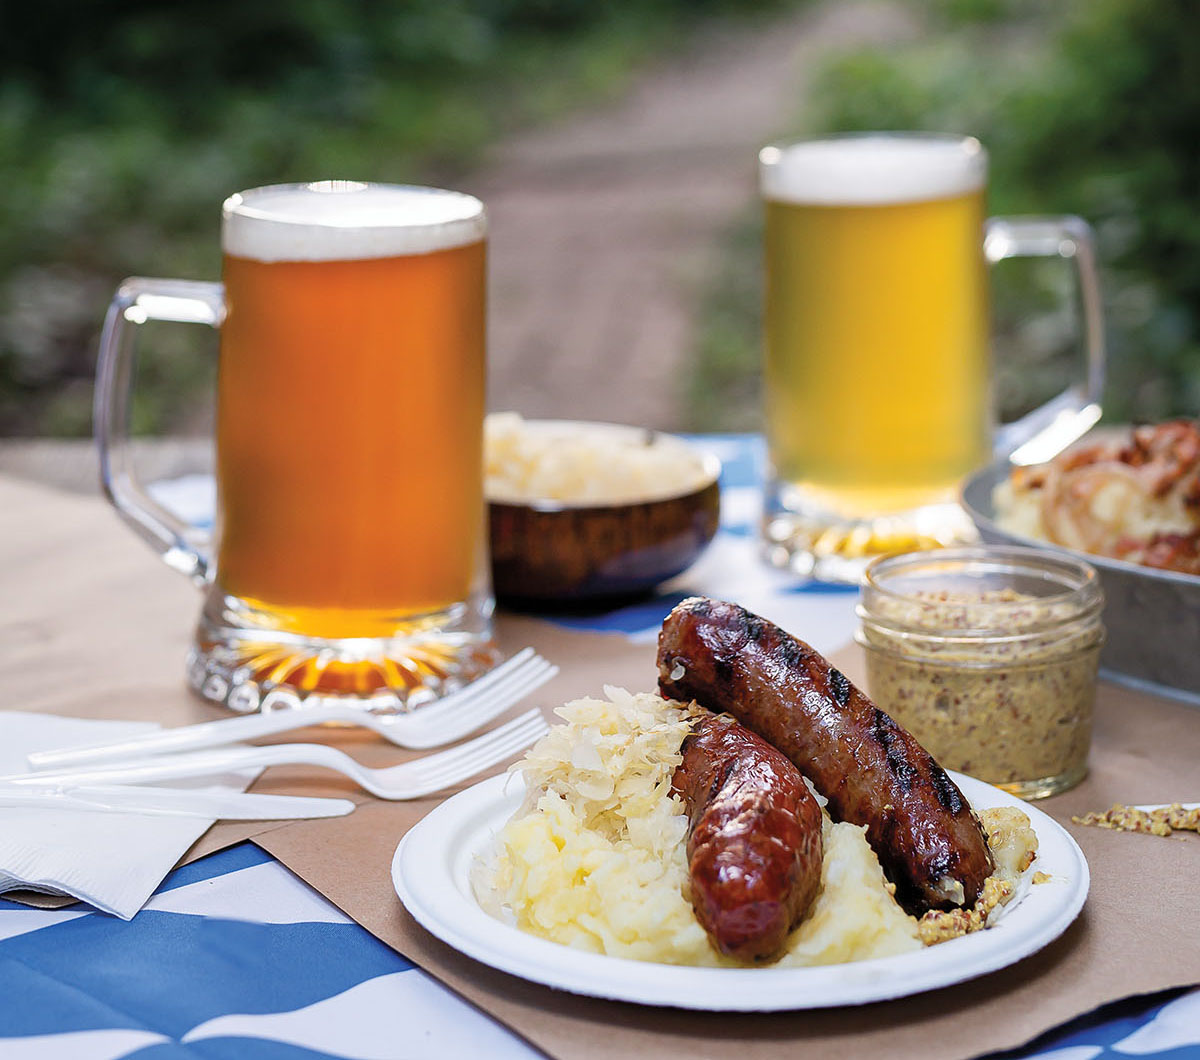 Two sausages on a pile of sauerkraut with mustard and beer